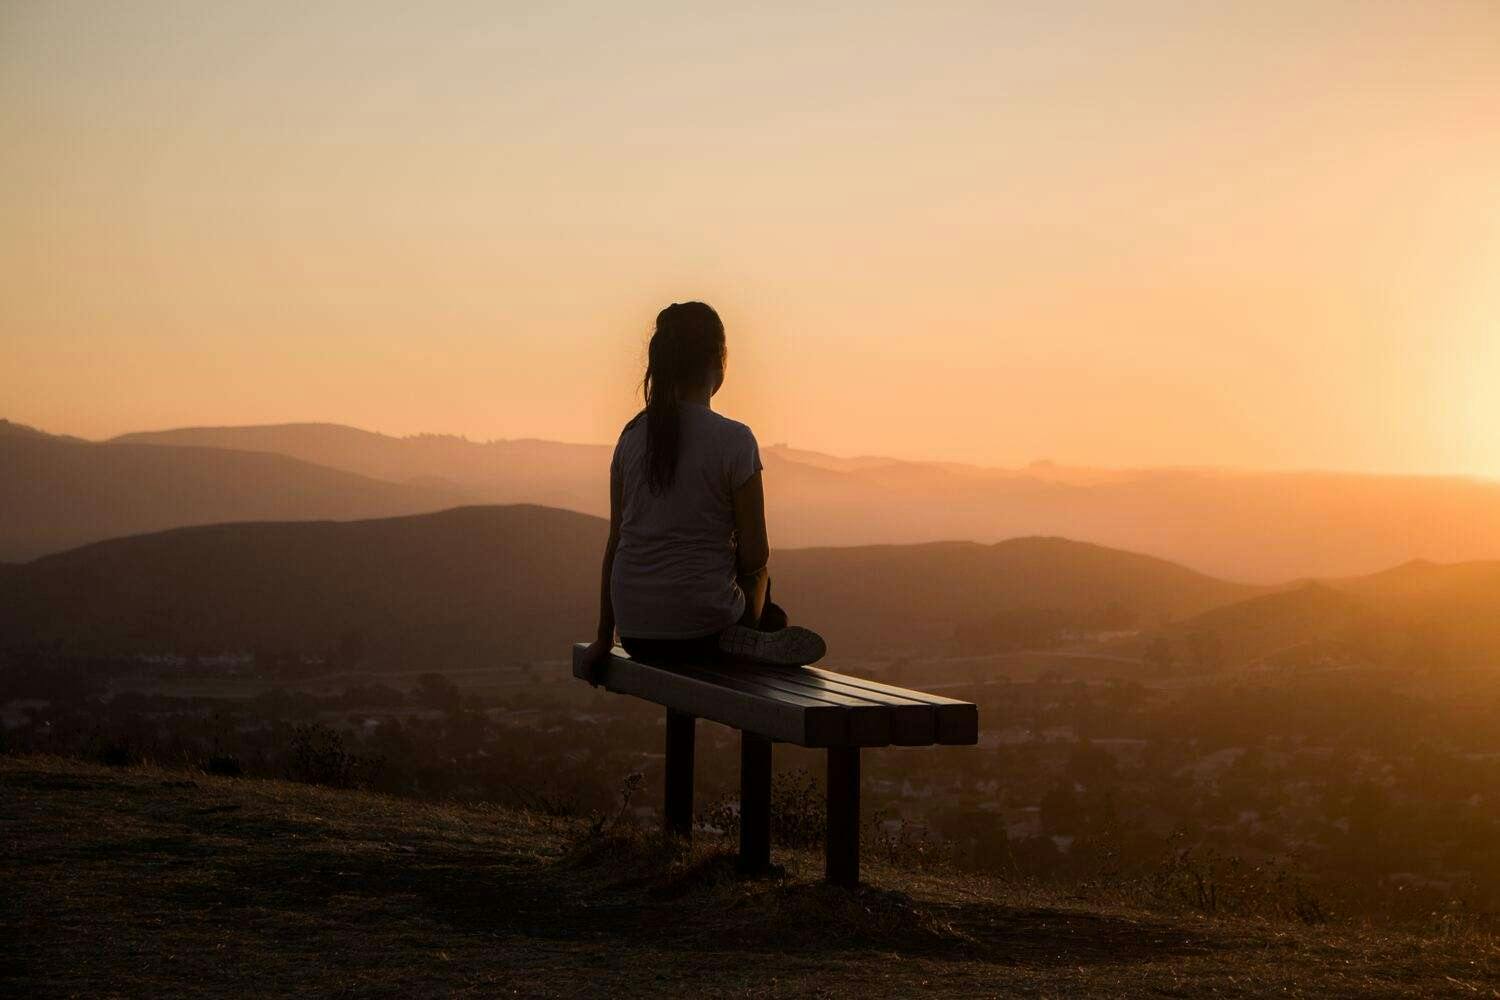 Where is the best place to meditate?